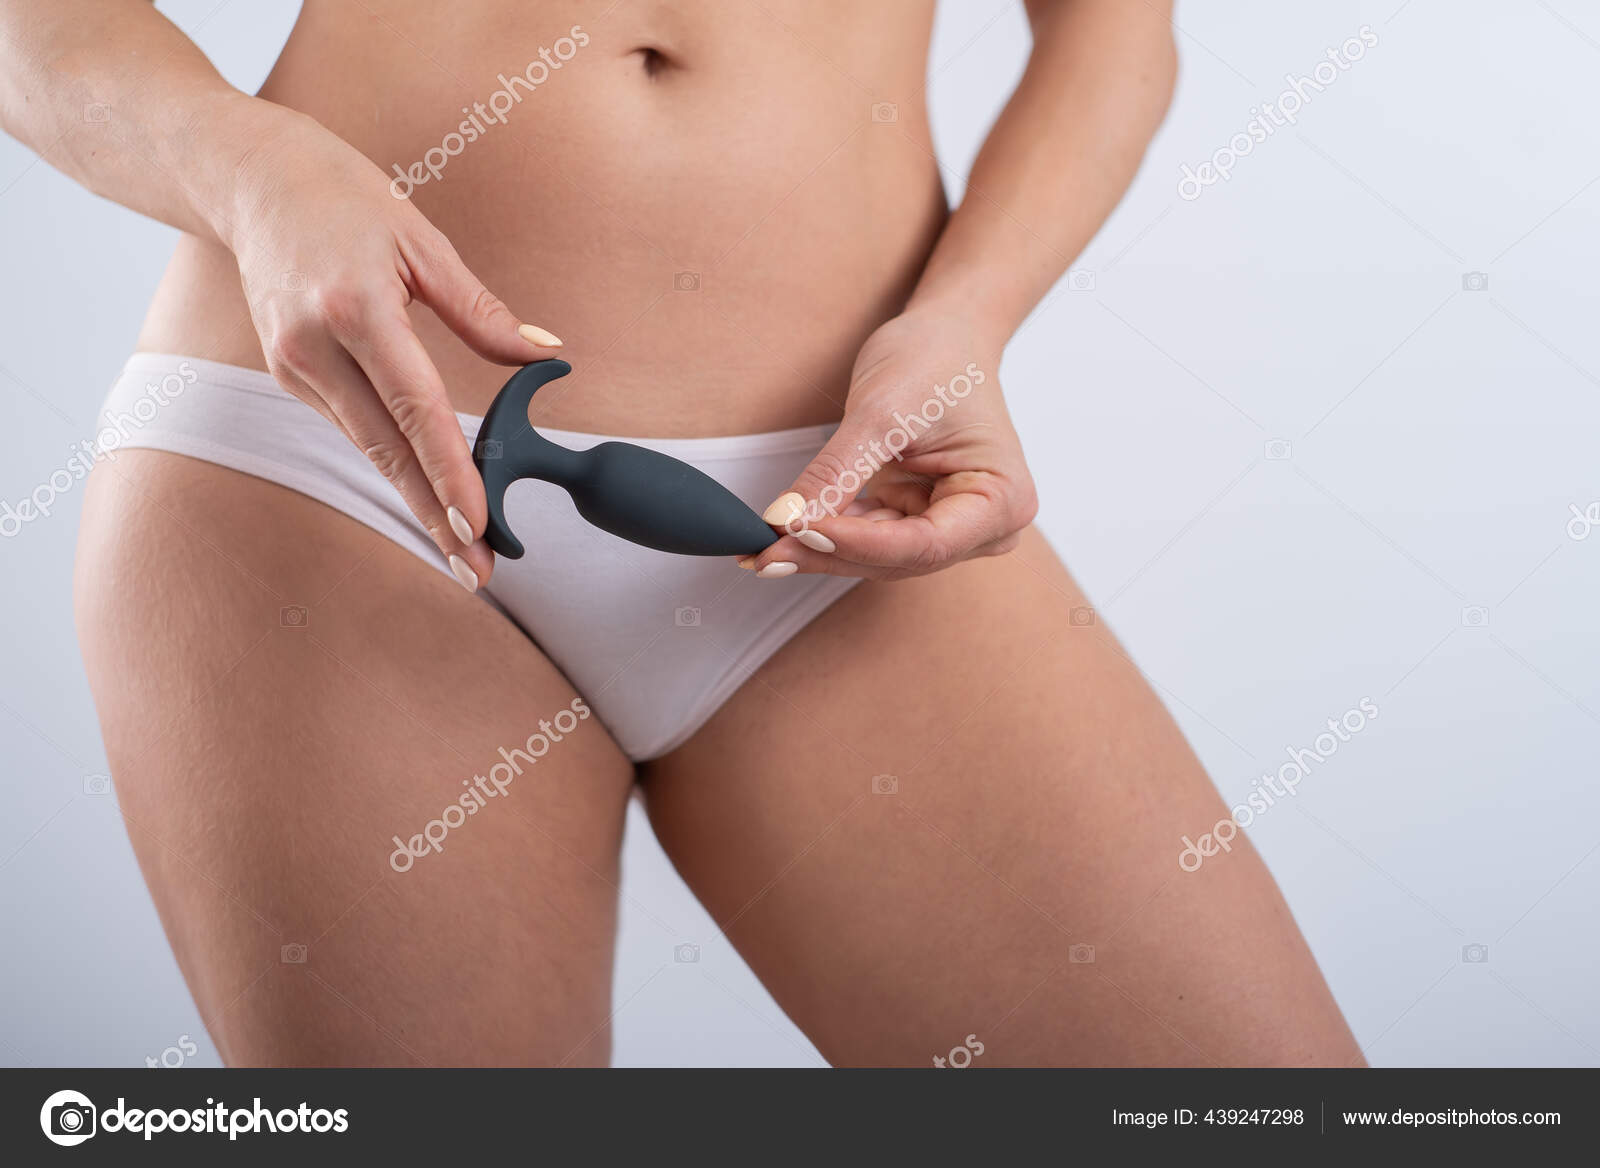 A faceless woman in white cotton panties holds a black butt plug